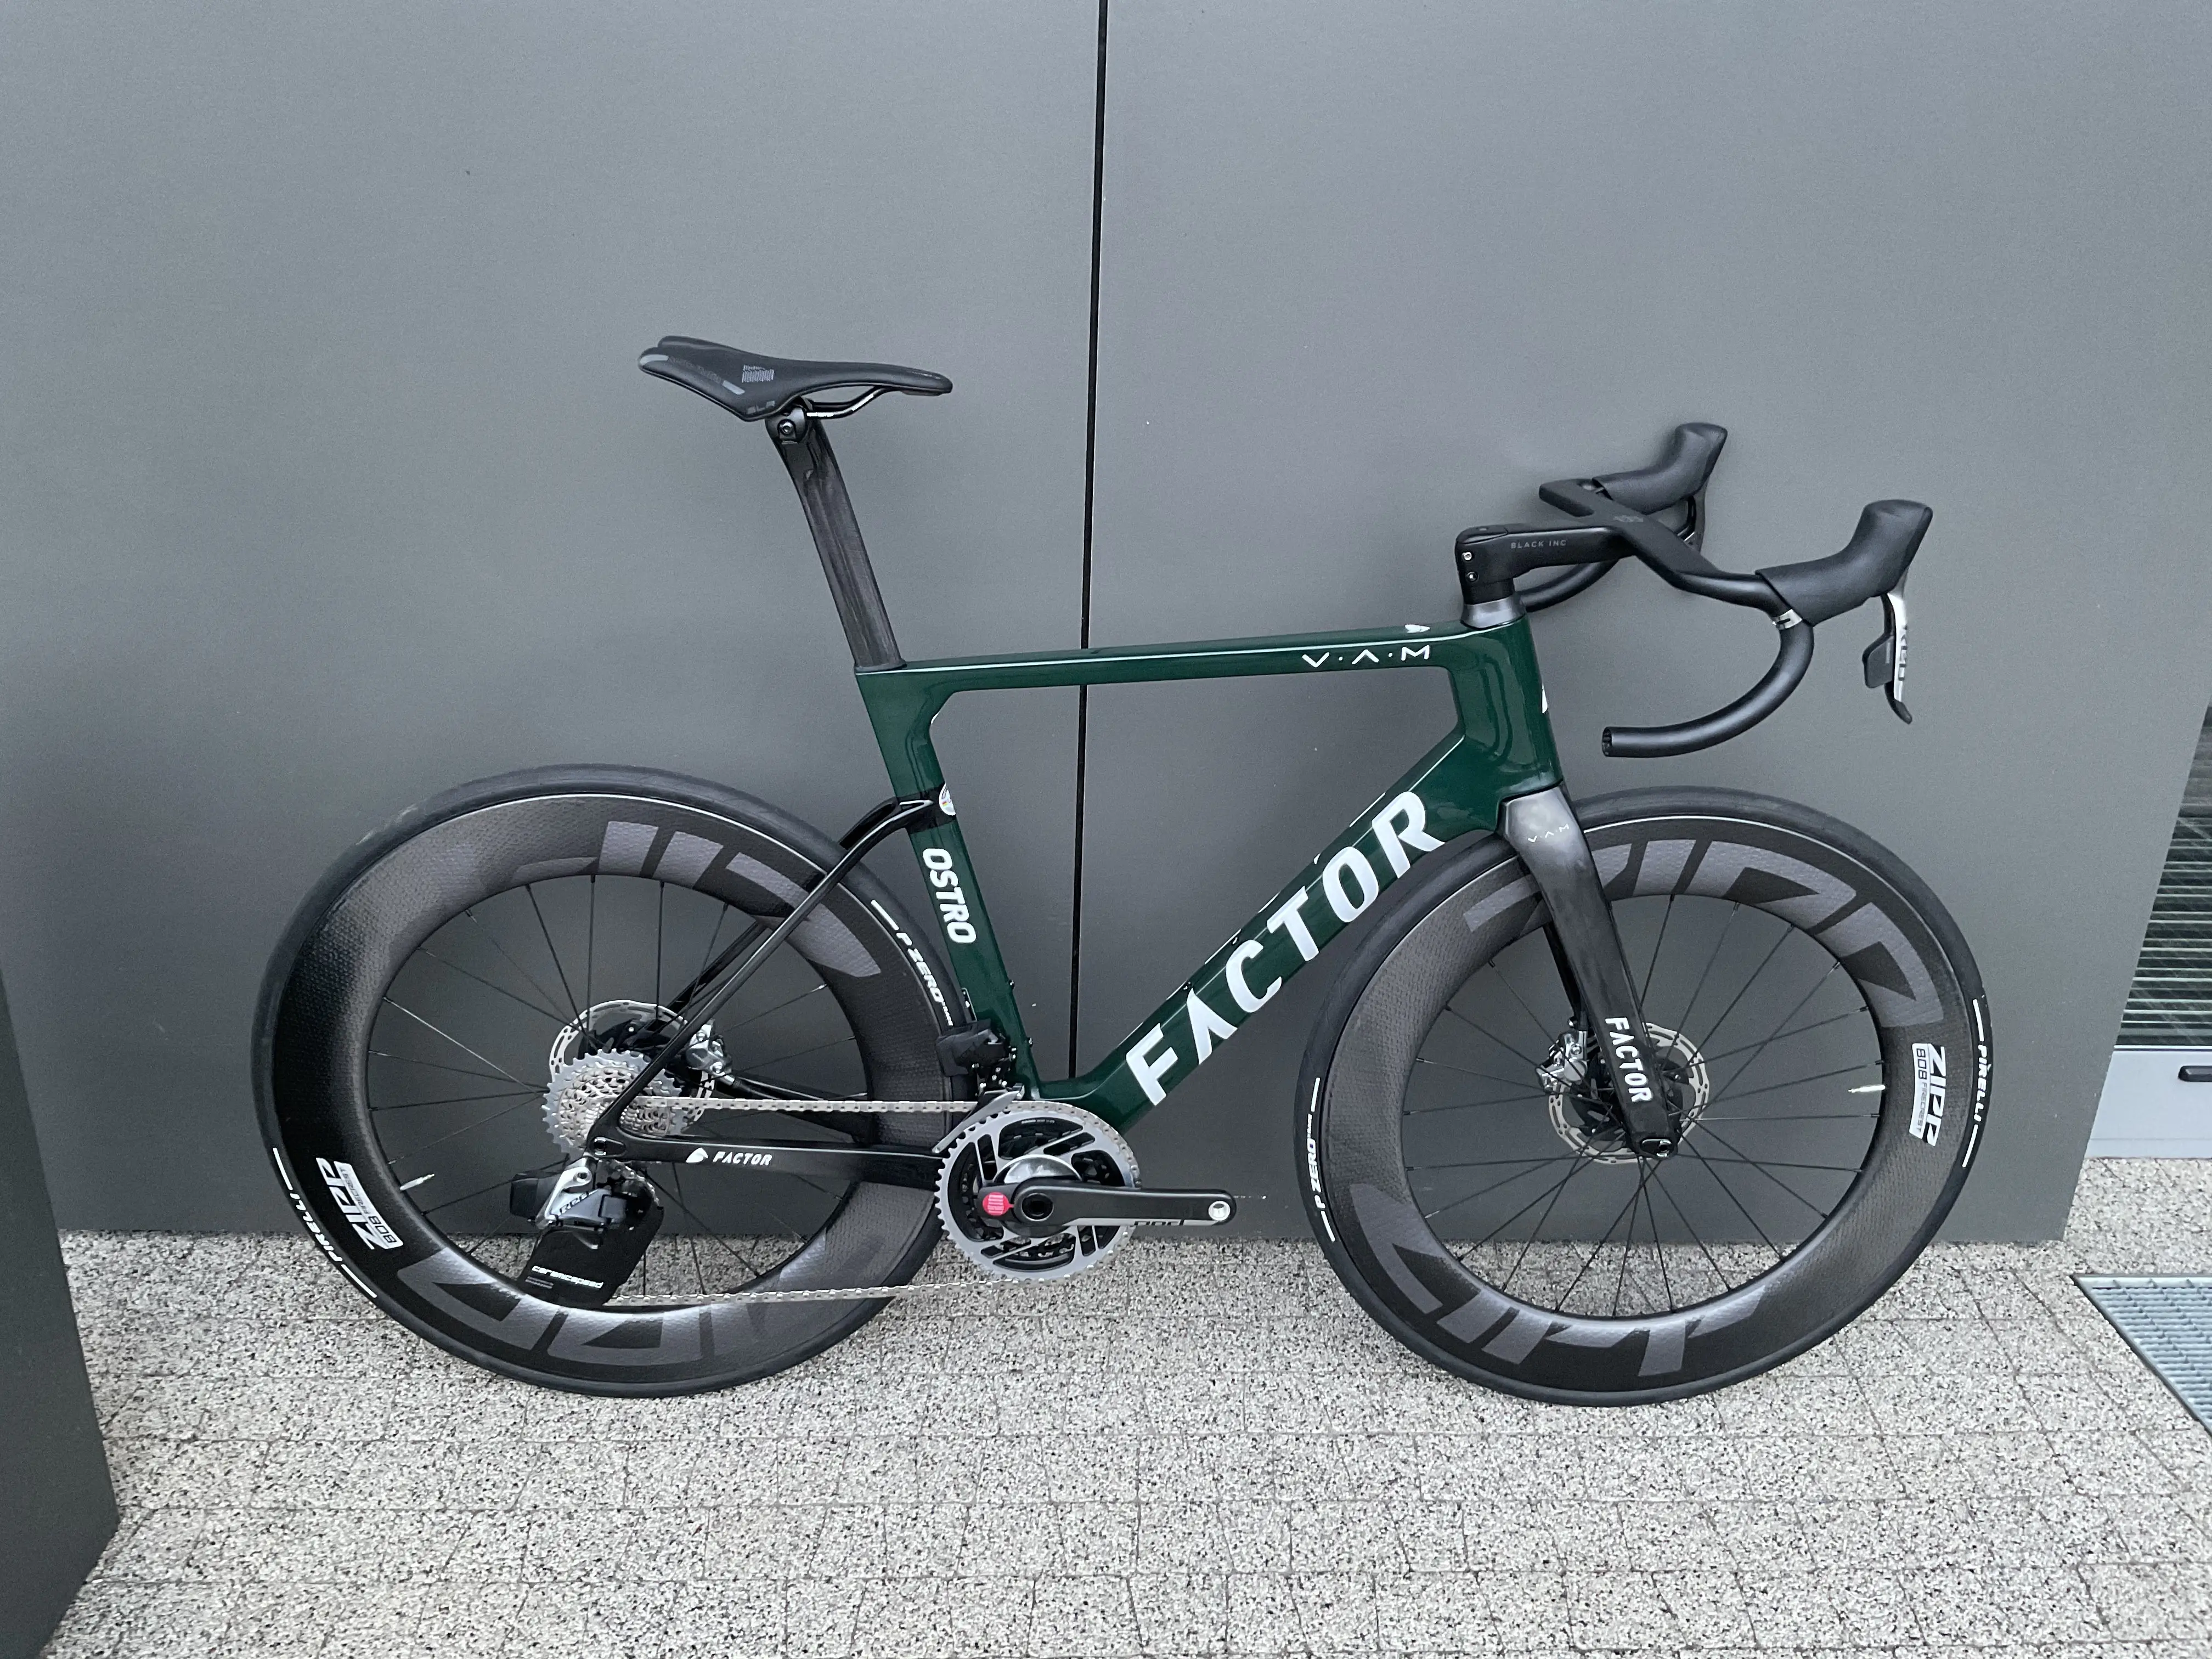 Factor OSTRO VAM SRAM Red AXS used in 54 cm | buycycle USA